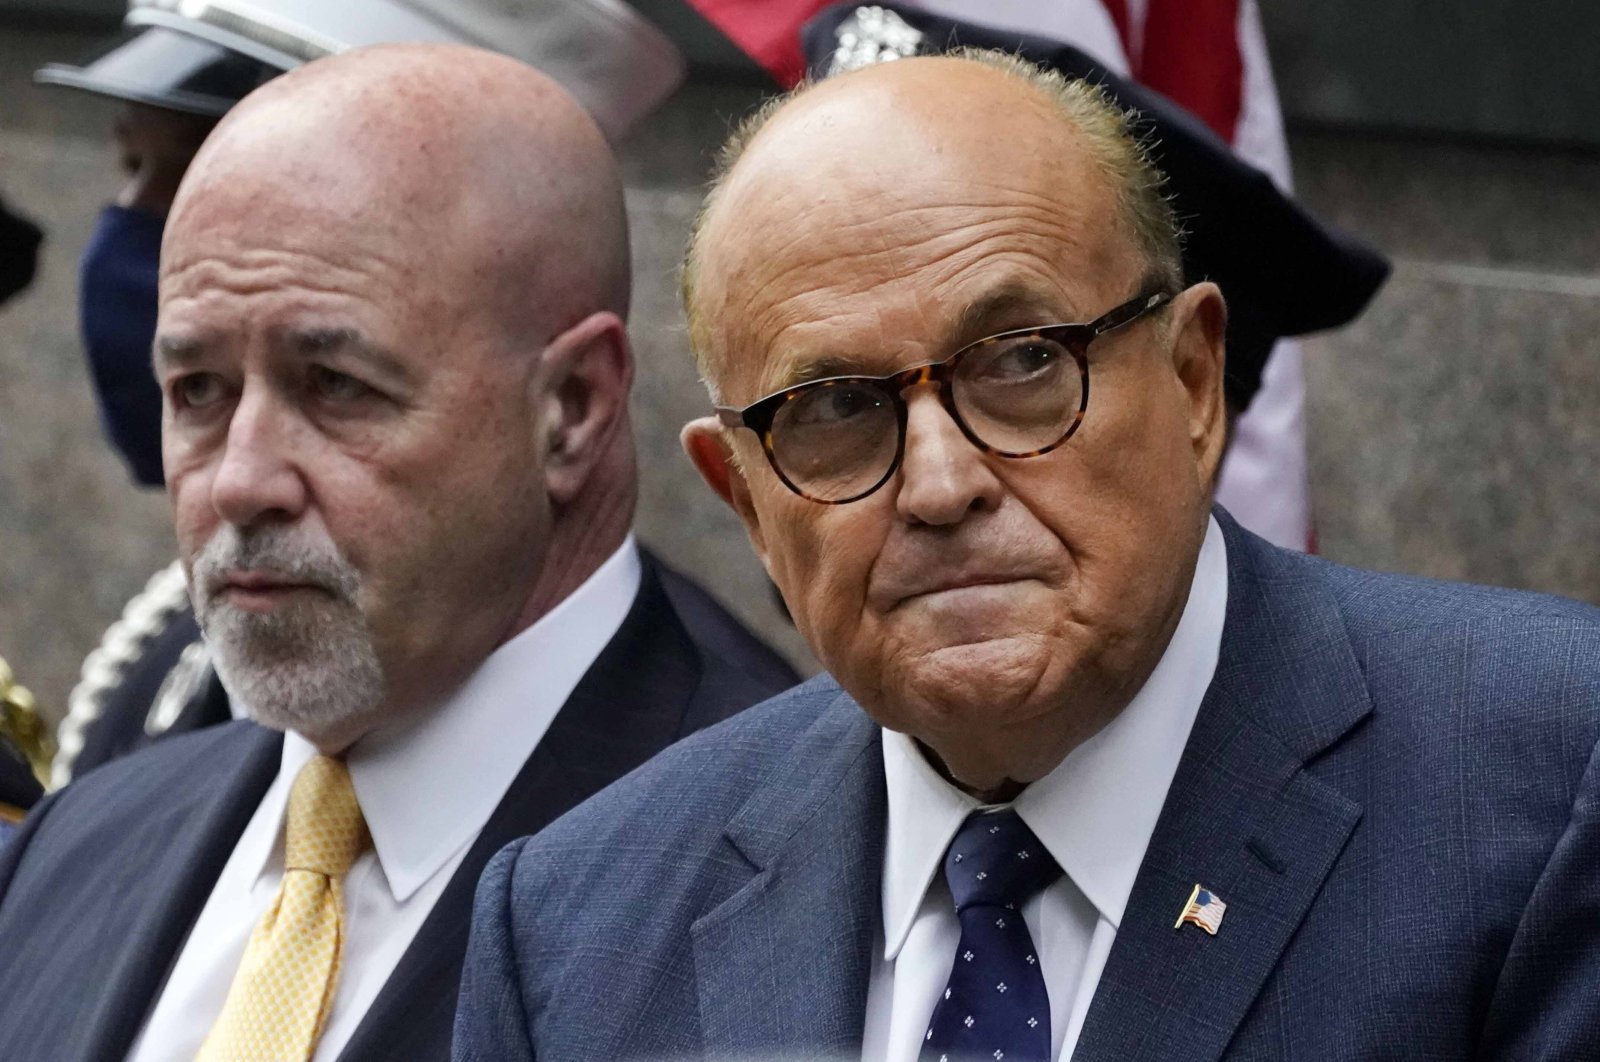 Former New York Mayor Rudolph Giuliani, right, and former New York City Police Commissioner Bernard Kerik (L) during the Tunnel to Towers ceremony in New York, U.S., Sept. 11, 2020. (AP Photo)